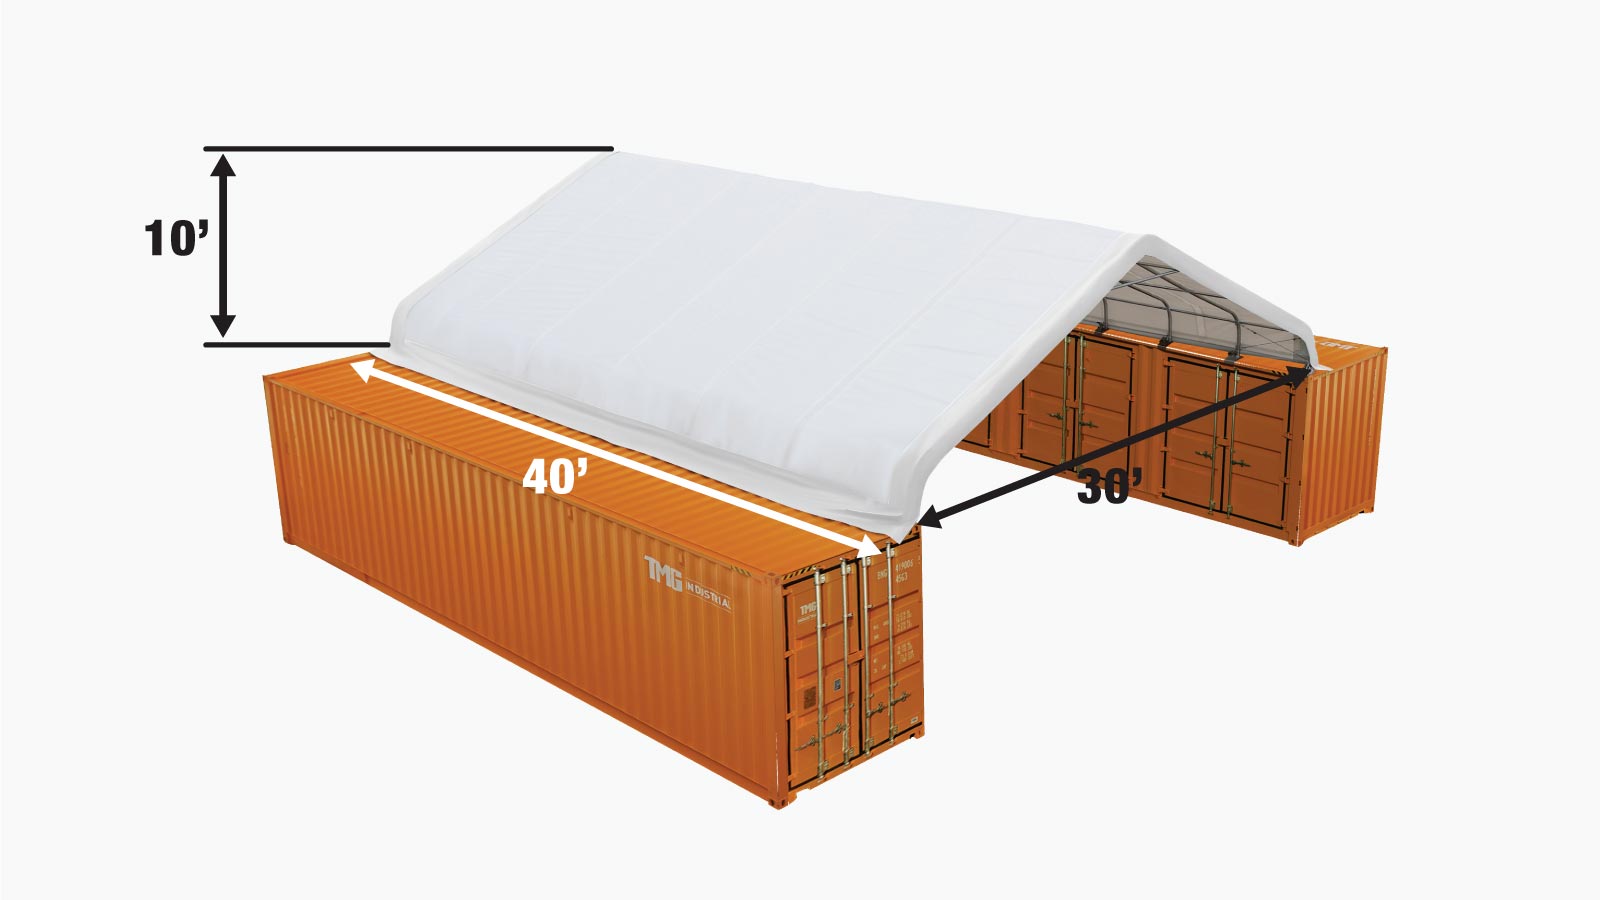 TMG Industrial 30' x 40' PVC Fabric Container Peak Roof Shelter Pro Series, Fire Retardant, Water Resistant, UV Protected, TMG-ST3041CV (Previously ST3040CV)-specifications-image